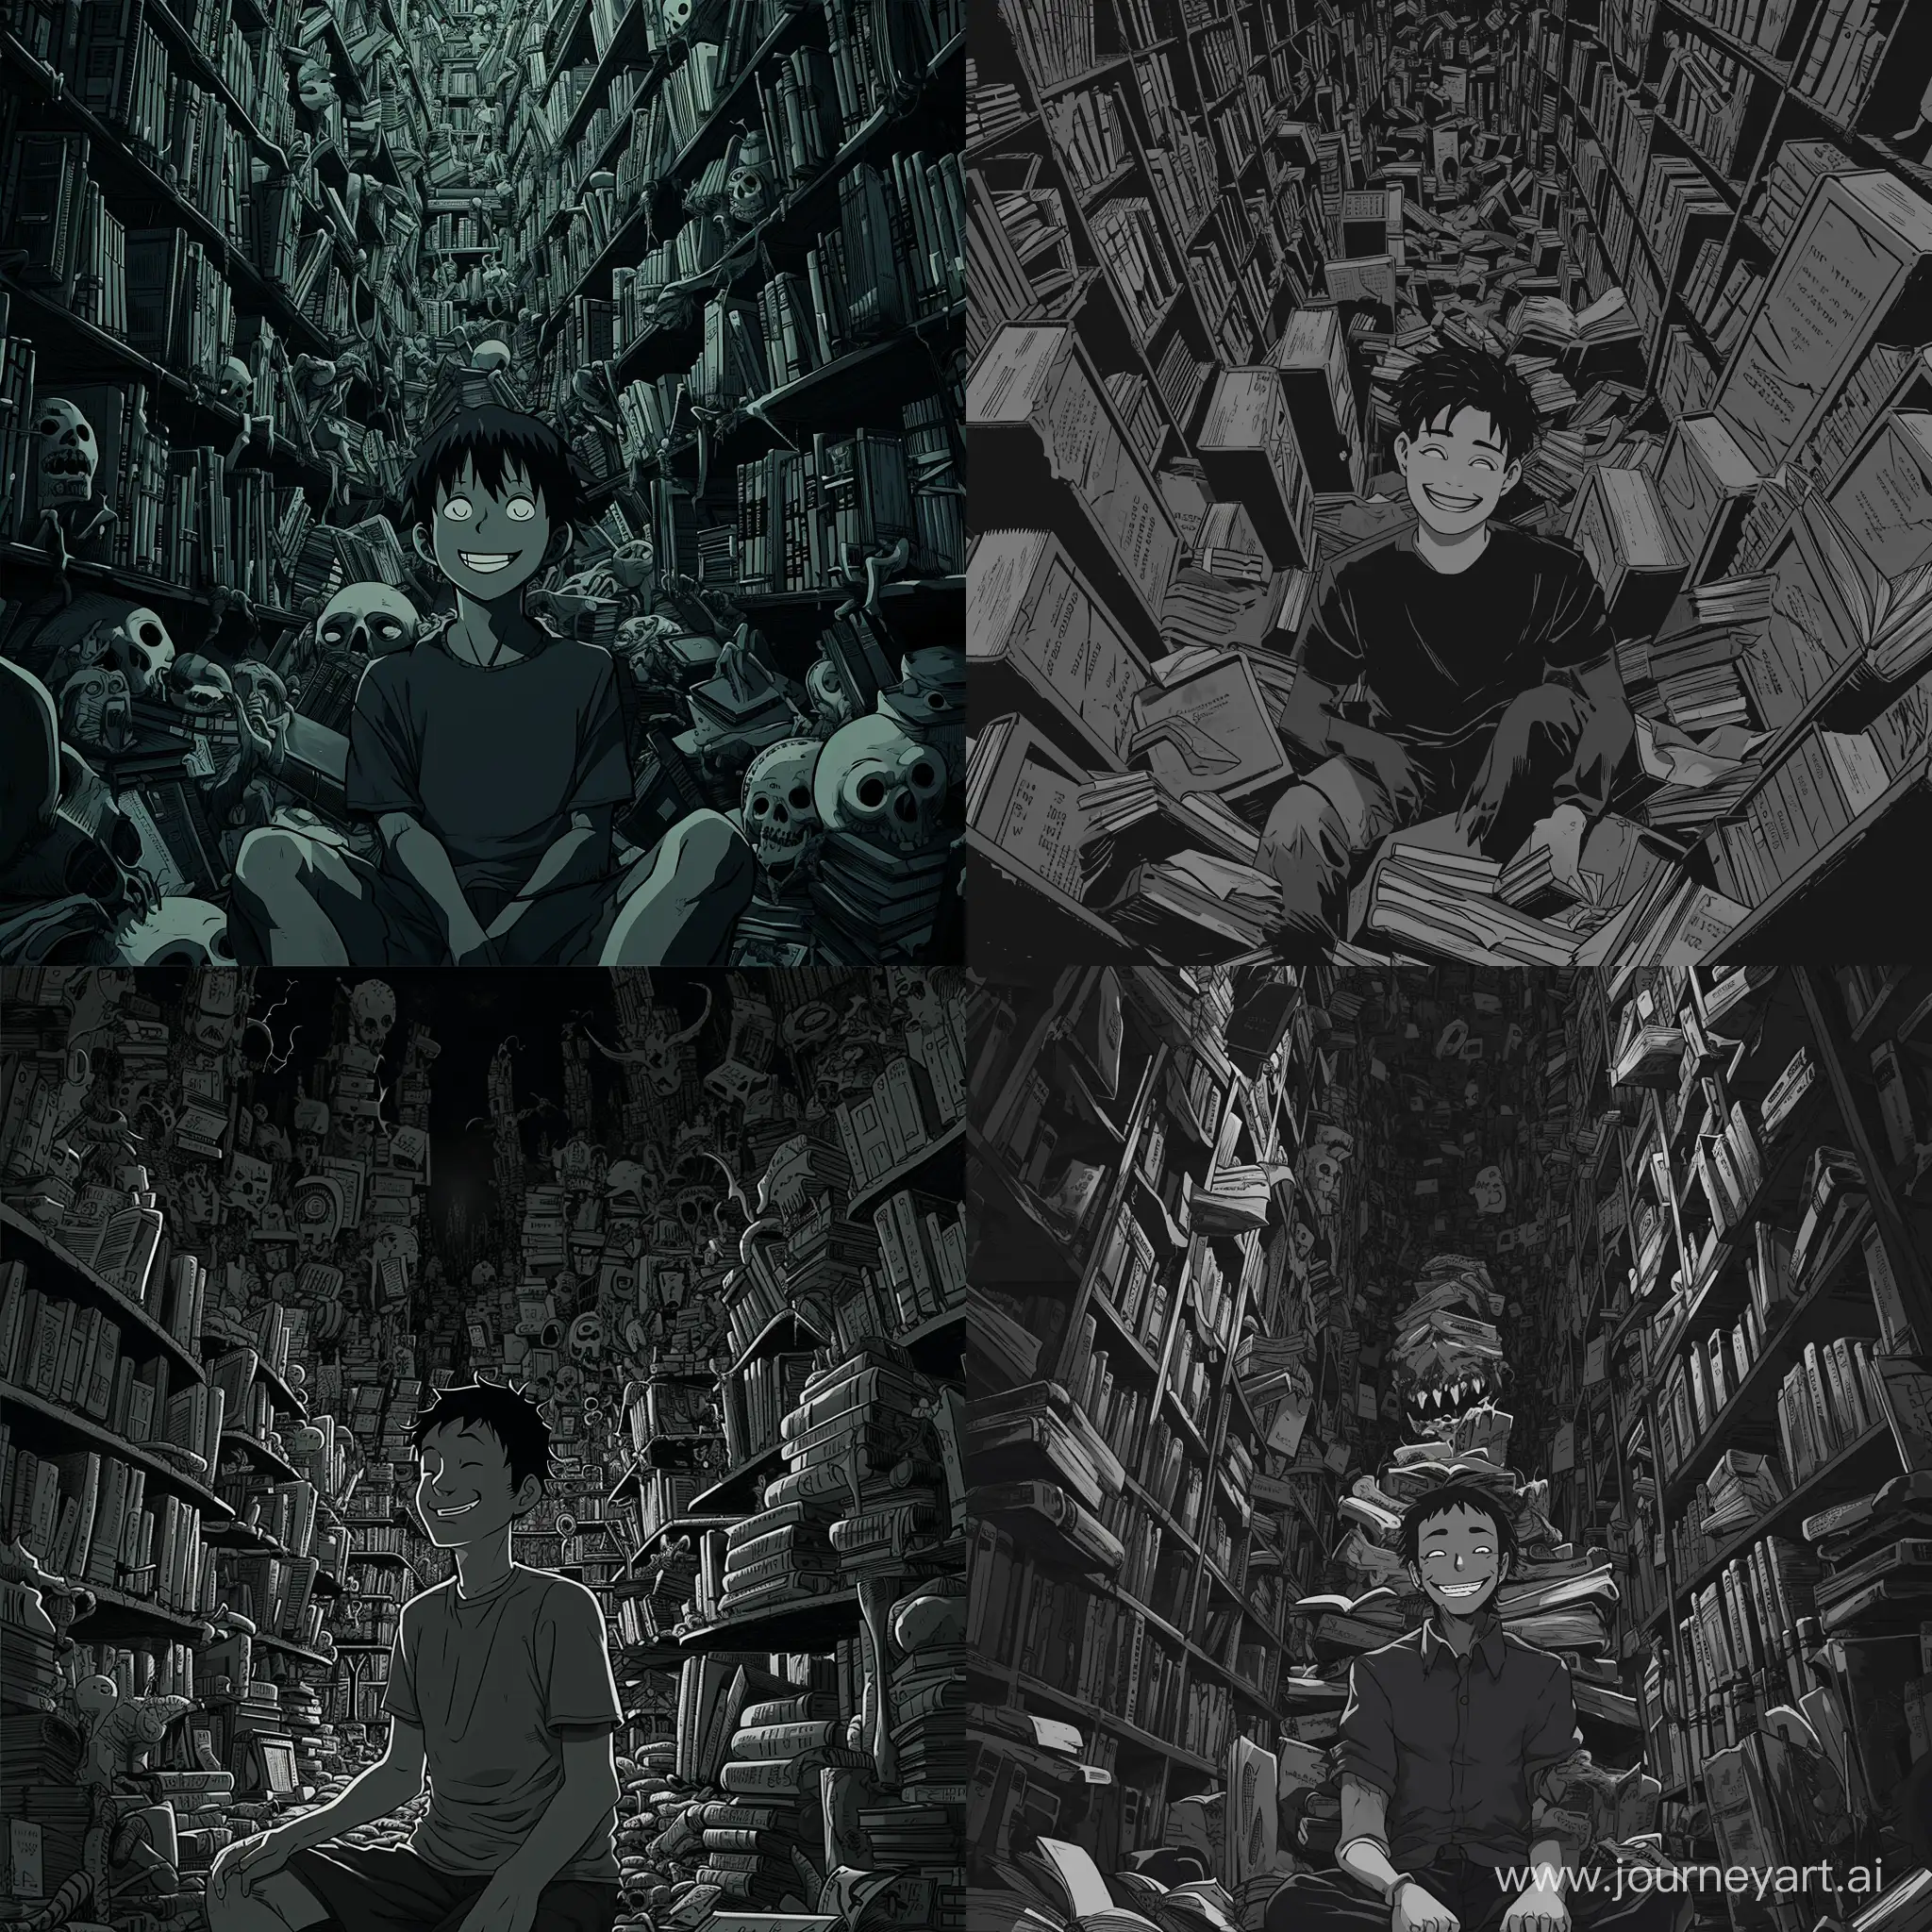 Eldritch-Anime-Scene-Smiling-Man-in-Surreal-Library